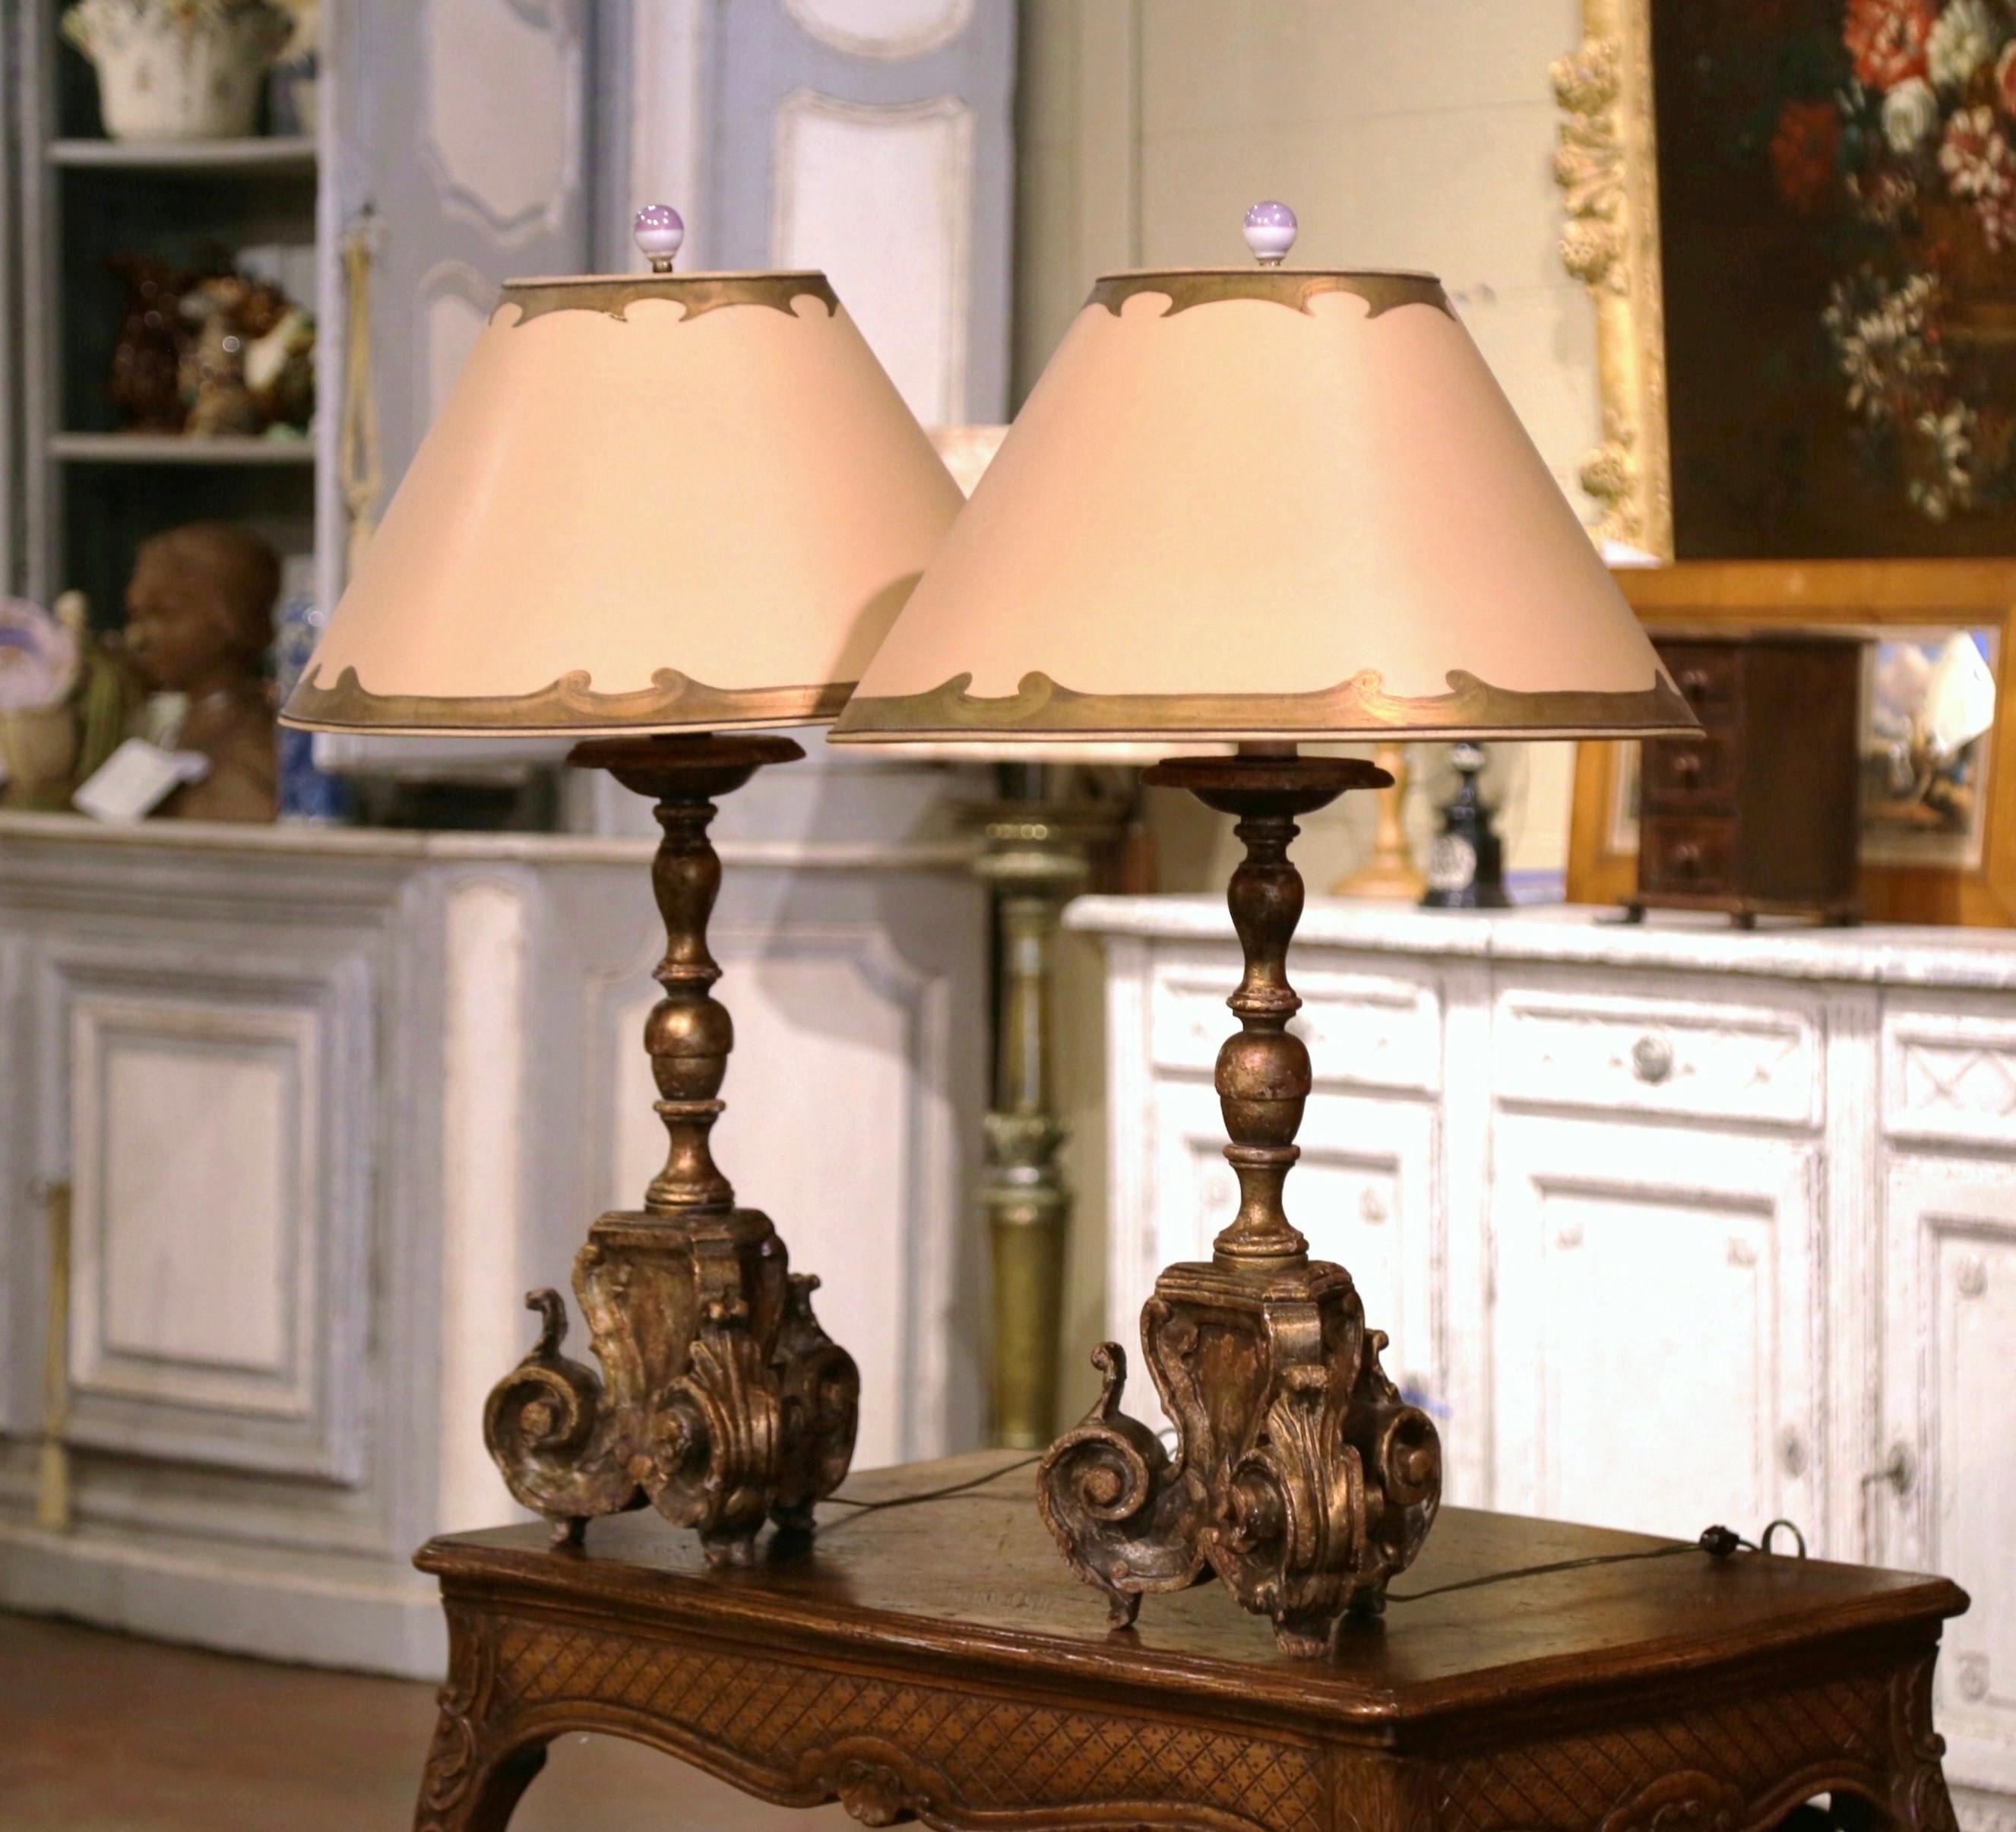 Add an air of drama and elegance to your home with this pair of antique table lamps. Crafted in Italy circa 1870 and converted into table lamps, each candlestick stands on a tripod base decorated with a carved medallion, and ending with scrolled